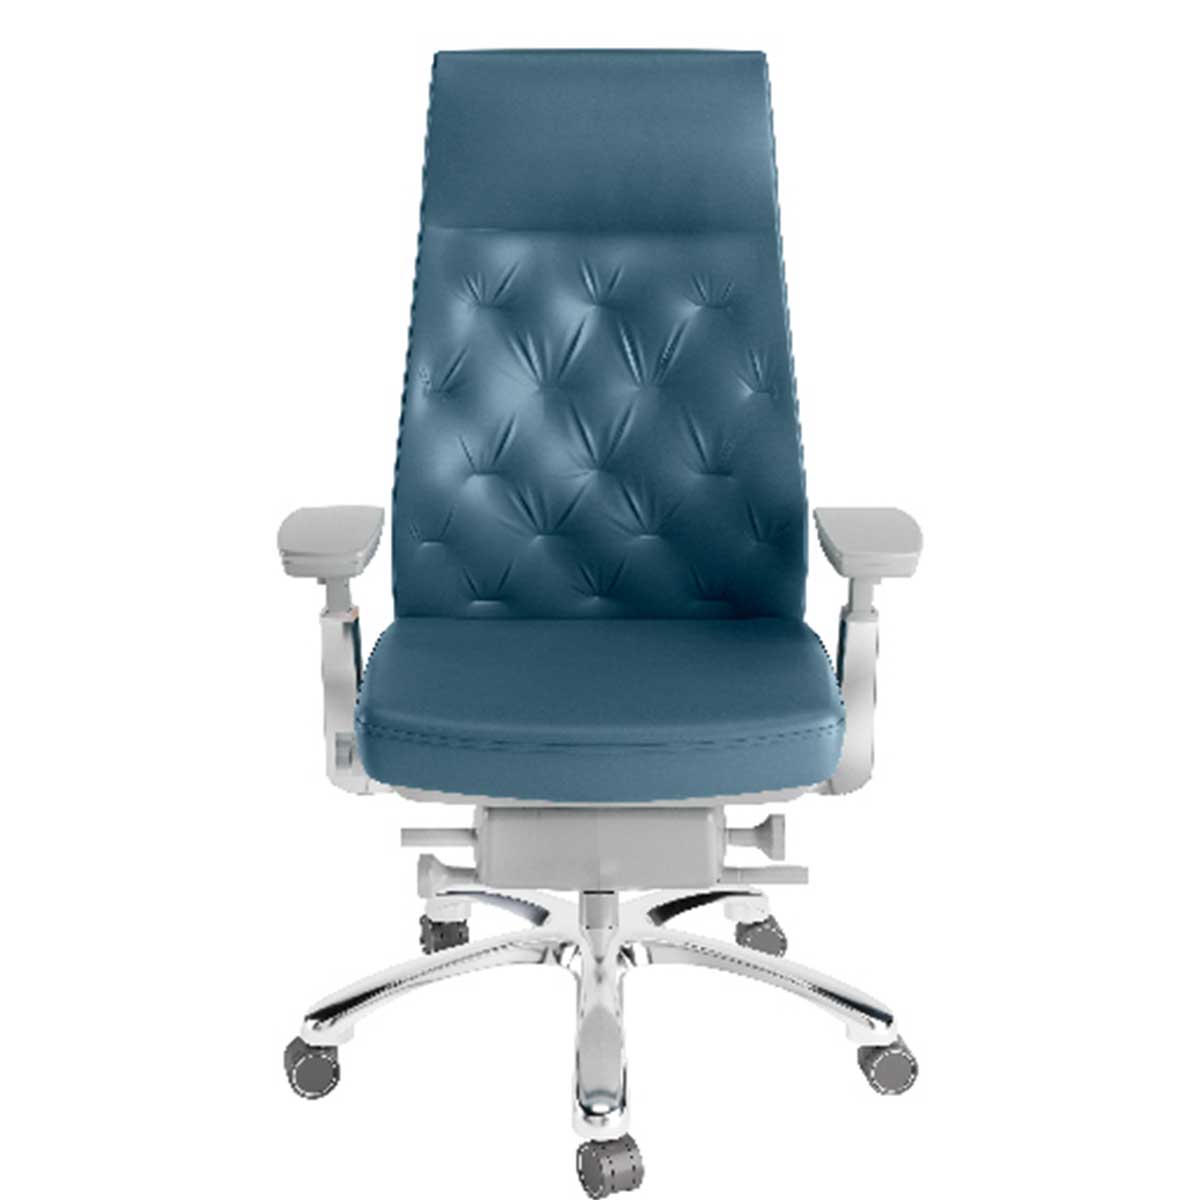 Boss Chair Manufacturers, Suppliers in Mayur Vihar Phase 3